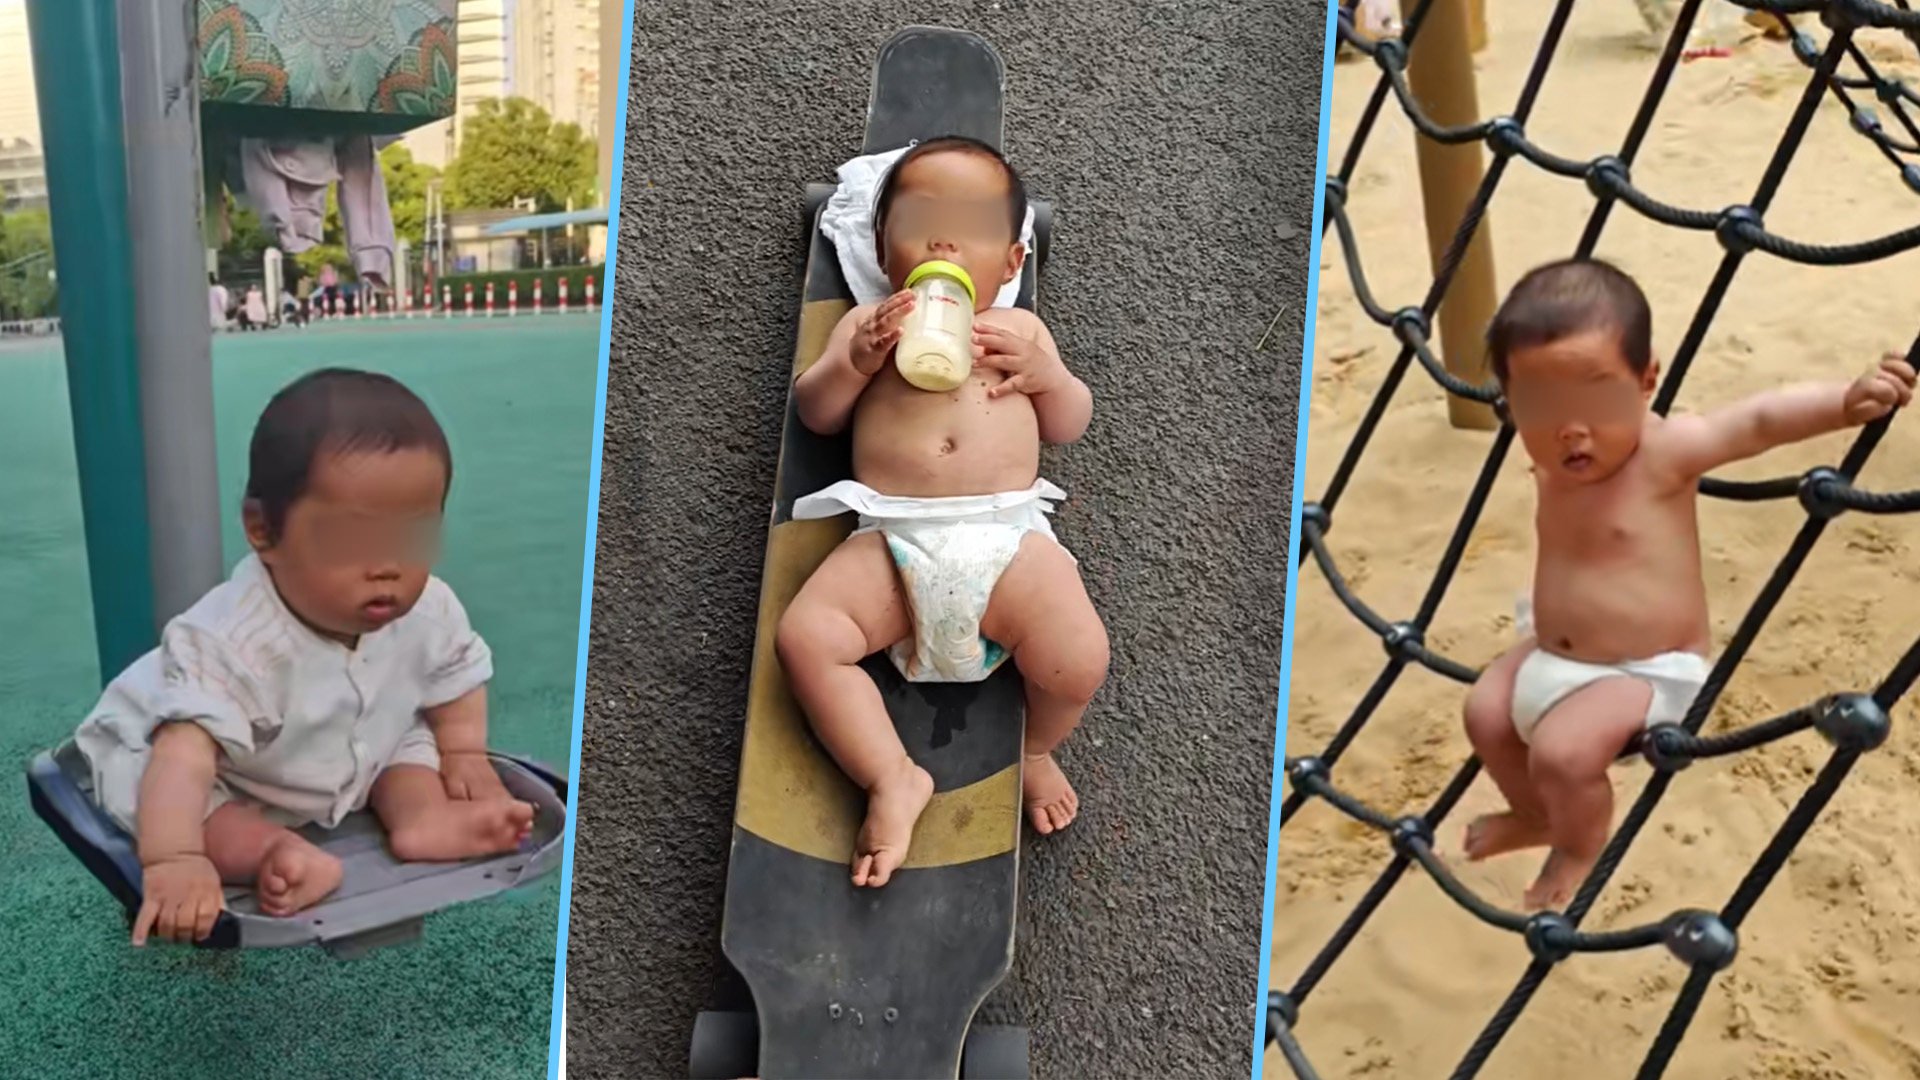 A parenting KOL in China who uses rough and ready training to teach physical fitness to his seven-month-old baby son has faced criticism online for his methods. Photo: SCMP composite/Douyin